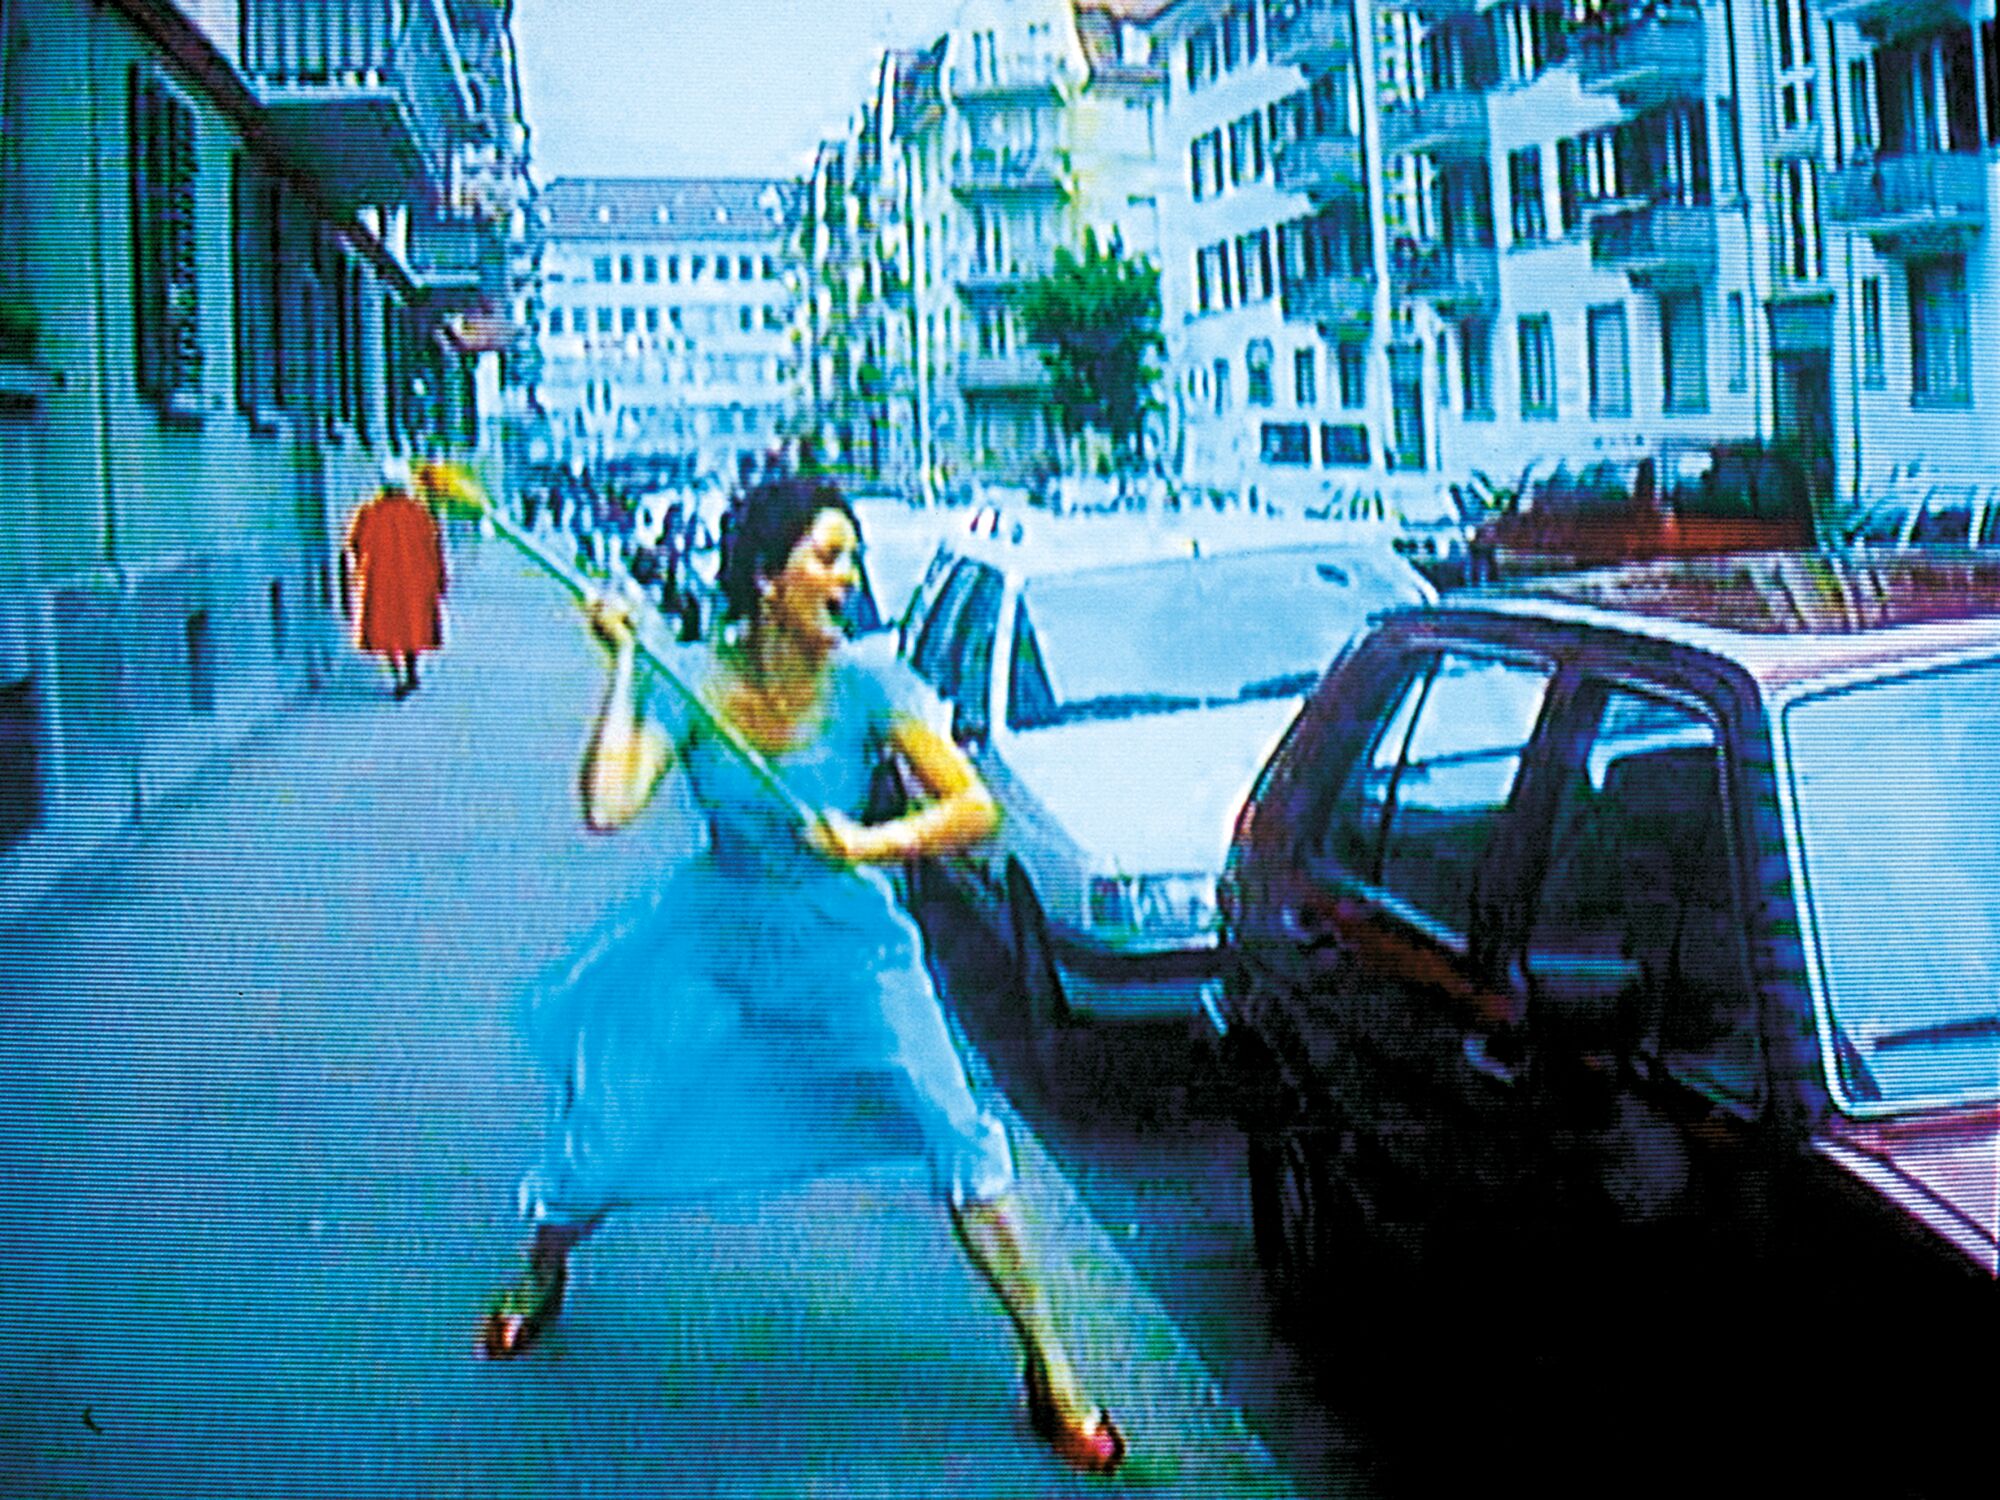 A woman in a sky blue dress and red shoes is seen on a sidewalk, about to smash a car window with a giant flower